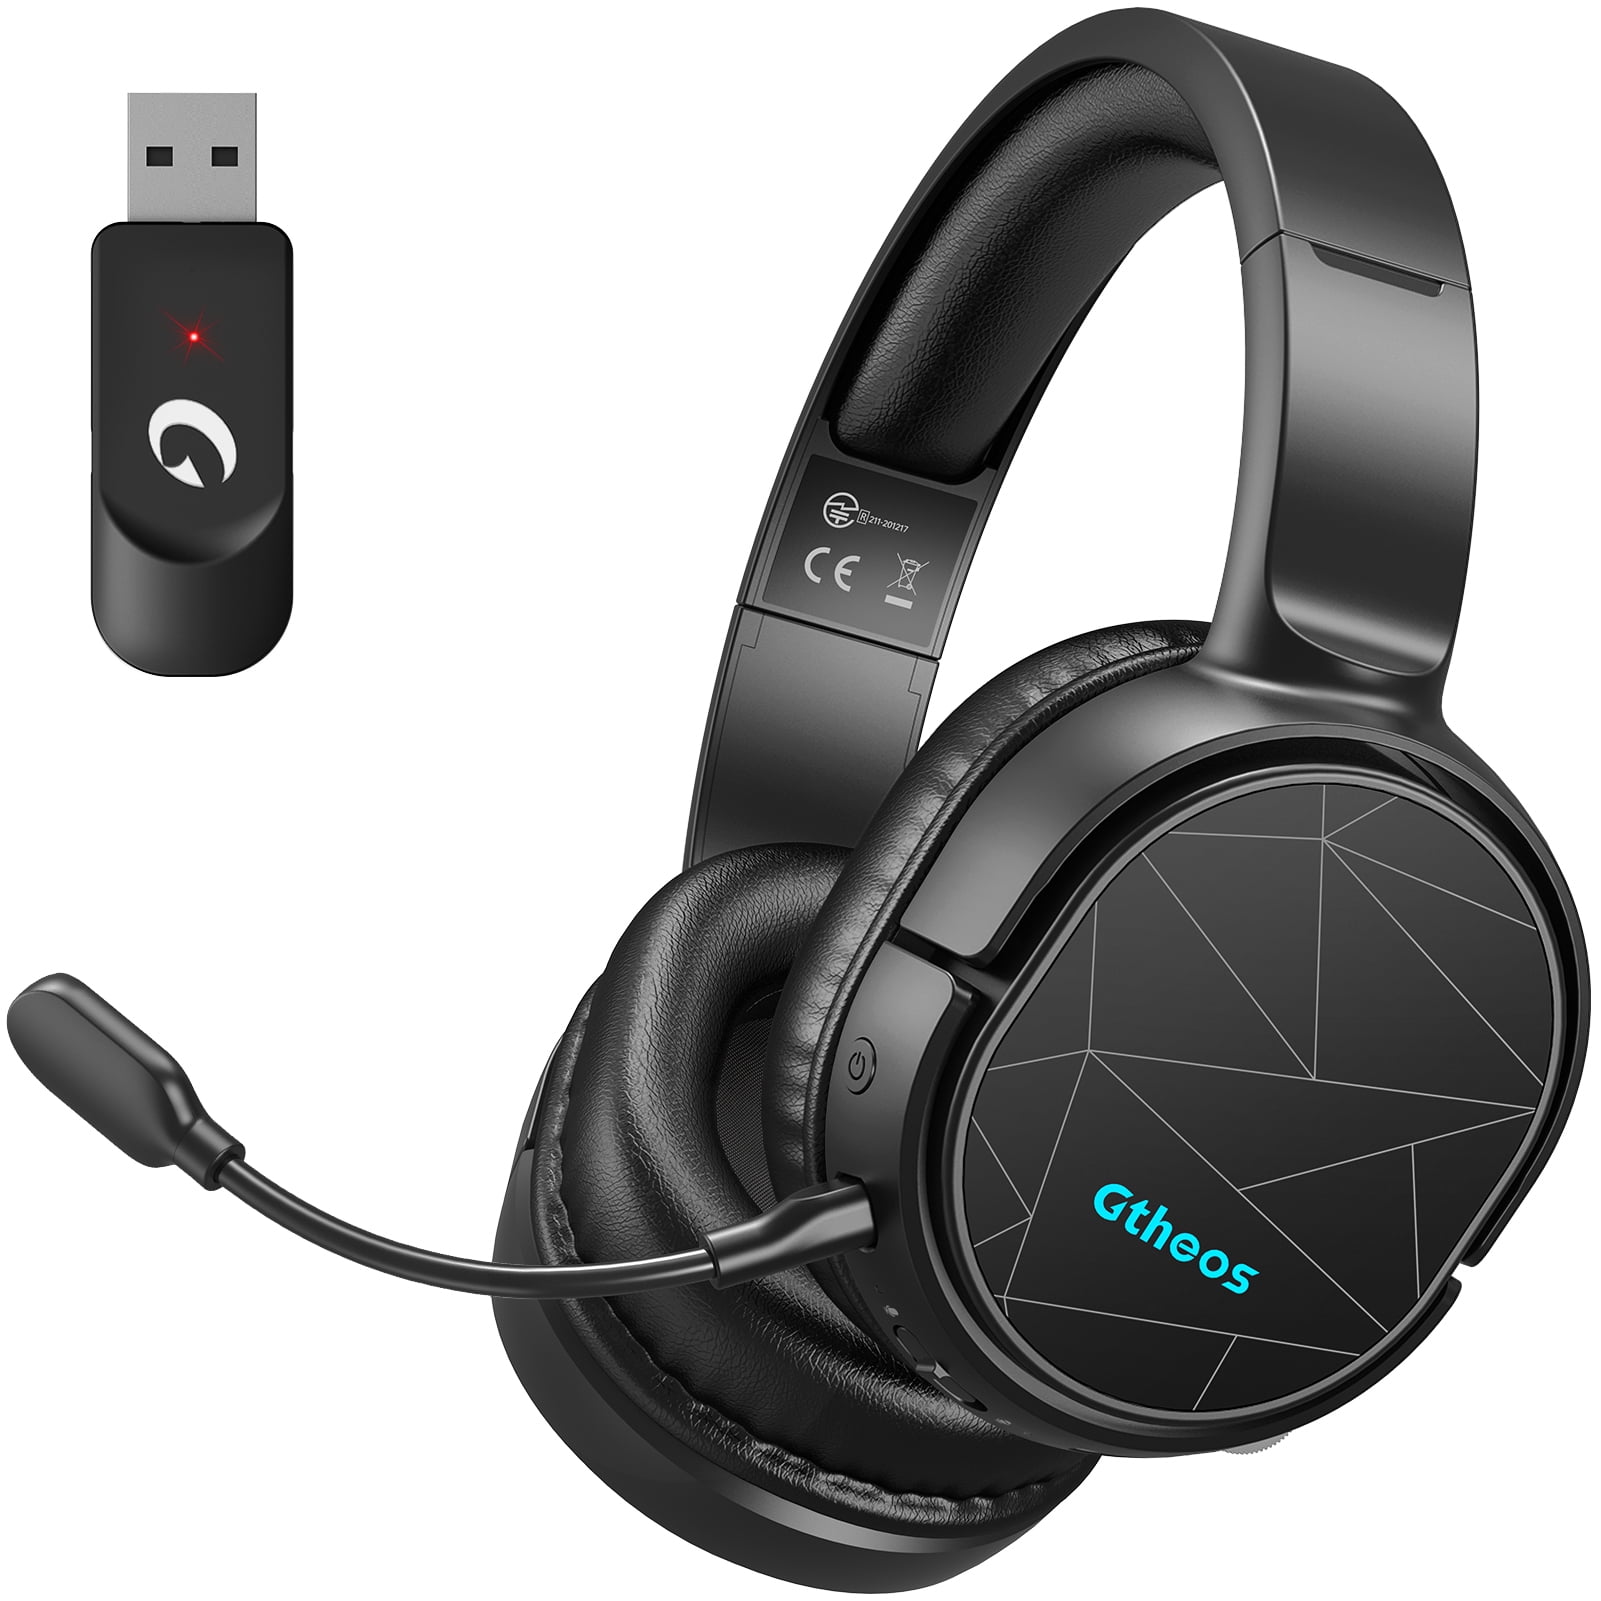 Goed doen het internet stuiten op Gaming Headset, Gtheos Wireless Gaming Headset Lossless 2.4GHz for PC PS4  PS5, Bluetooth Gaming Headphones with Detachable Noise Canceling  Microphone, 7.1 Surround Sound, 30H Long Lasting Battery - Walmart.com